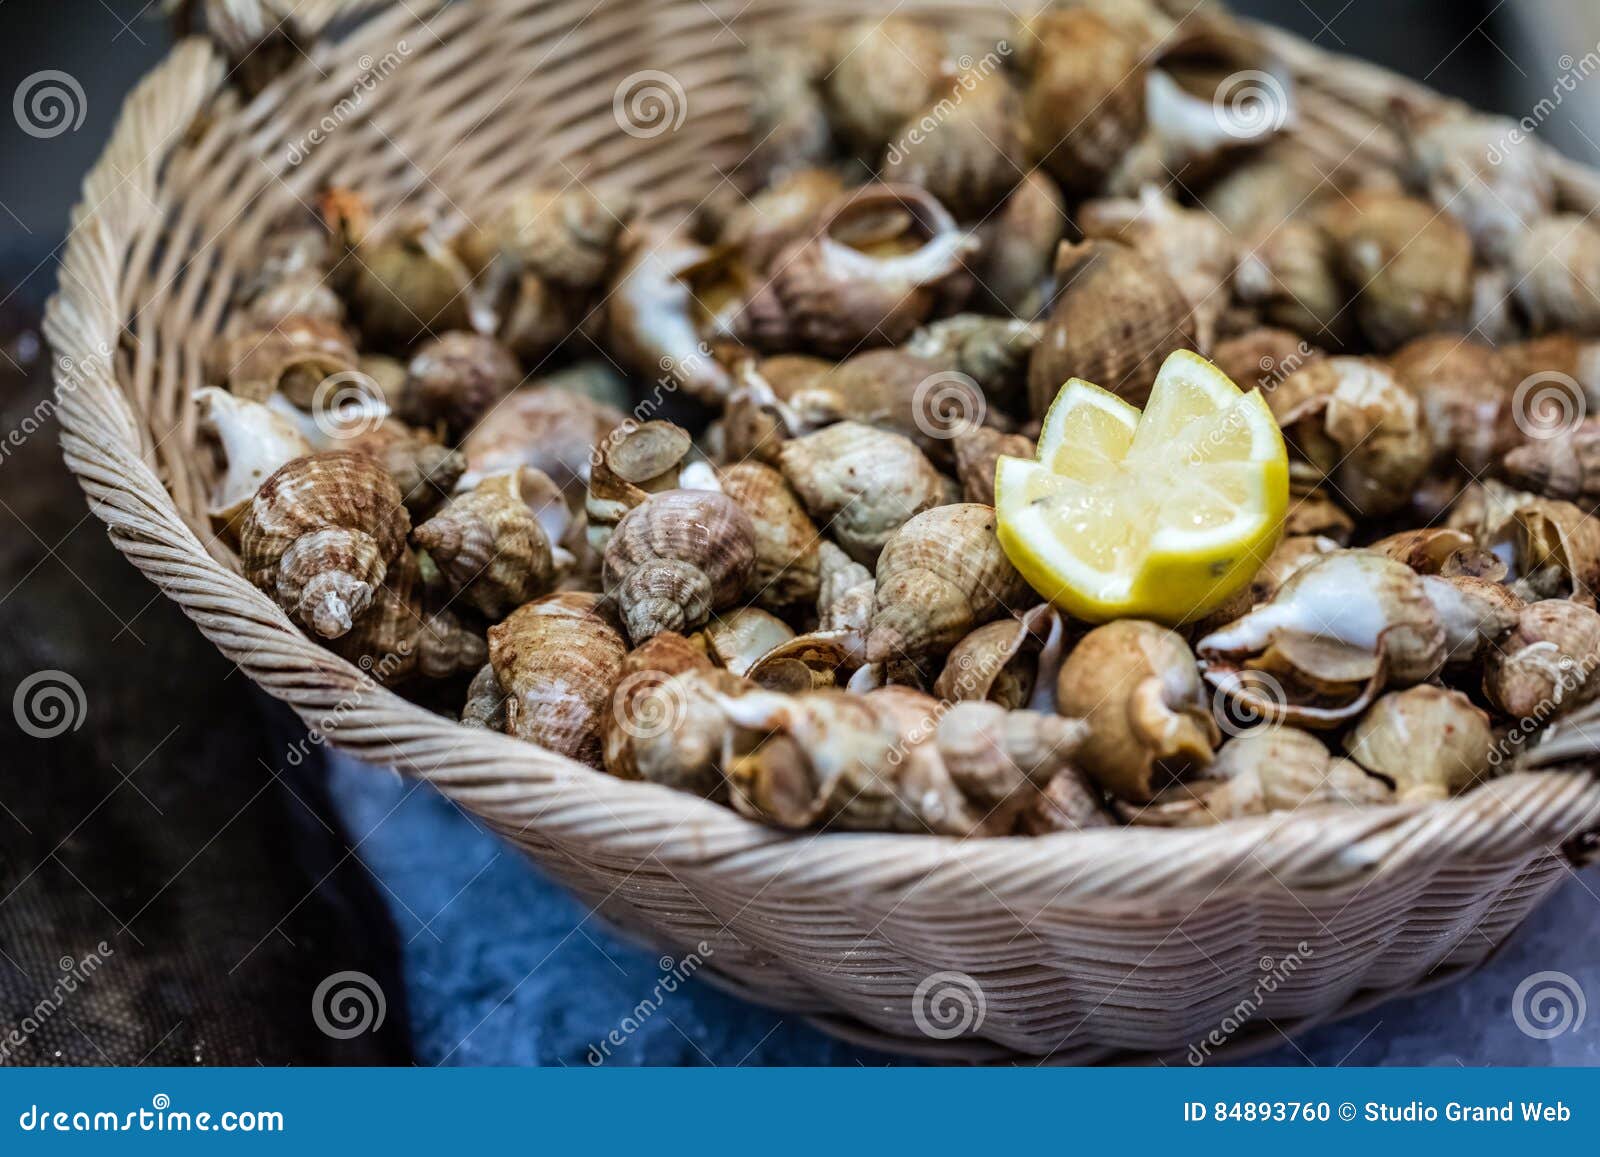 display of small whelks or french bulots crustaceans in basket